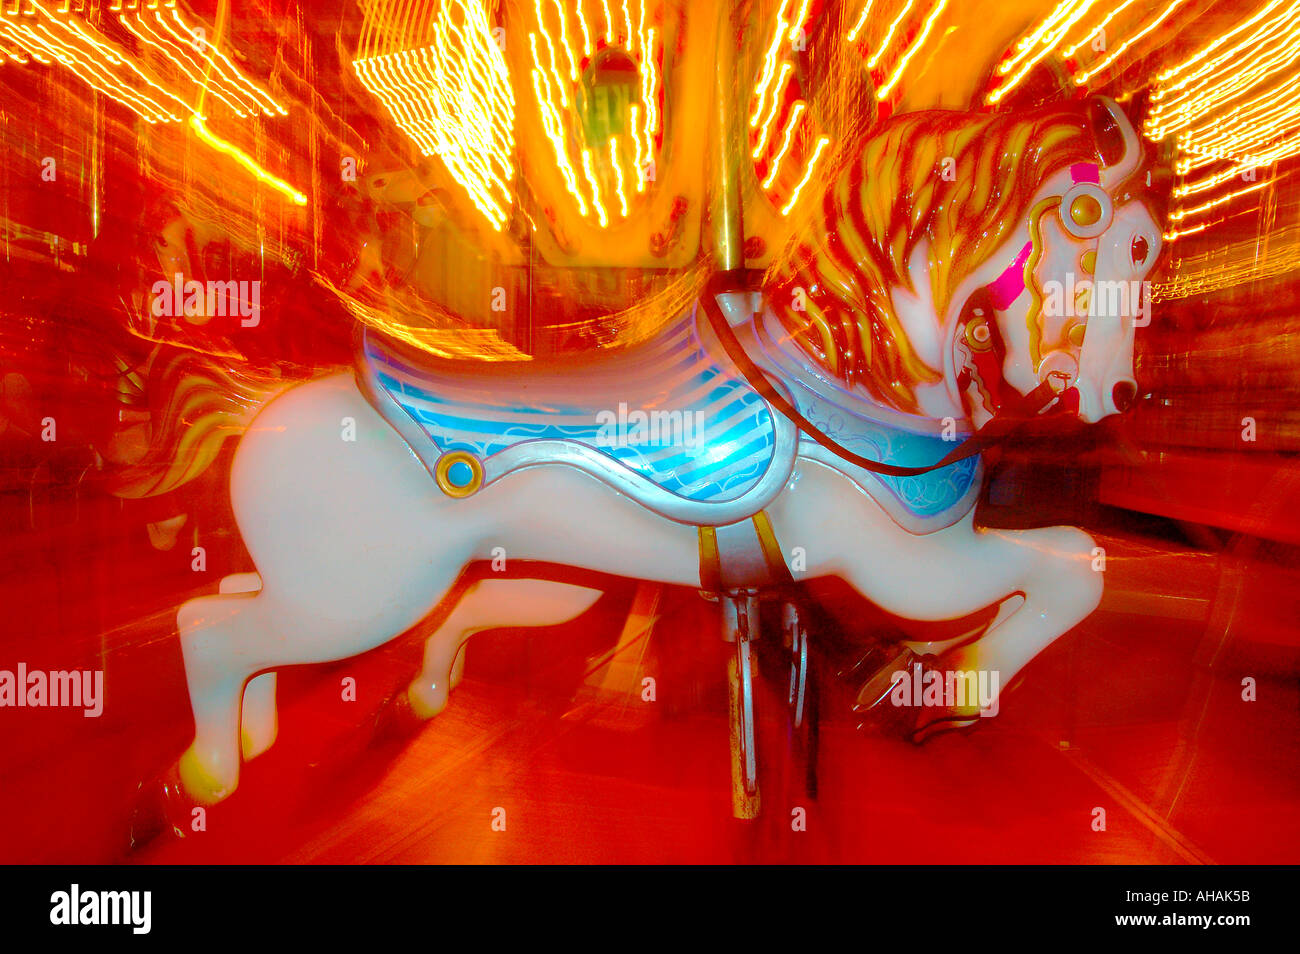 A coursel horse wildly lit spinning at a fun zone carnival Stock Photo